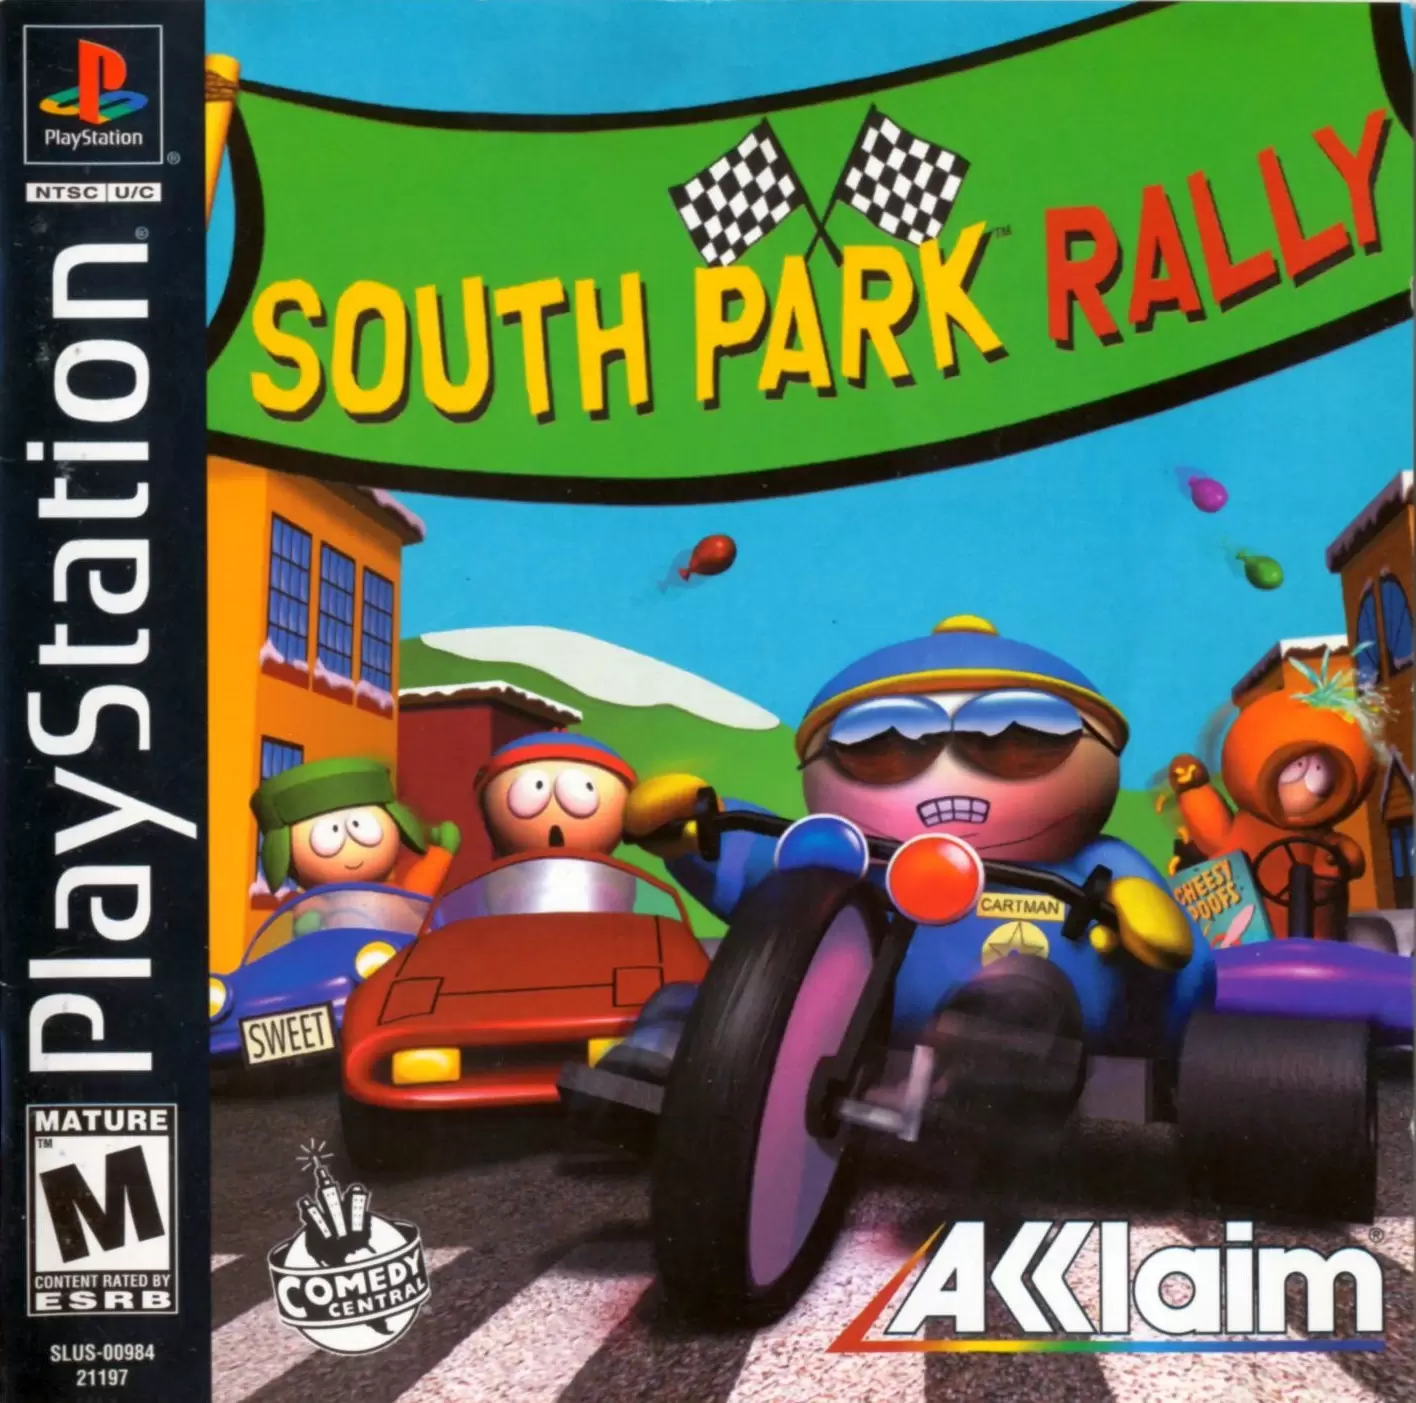 Playstation games - South Park Rally